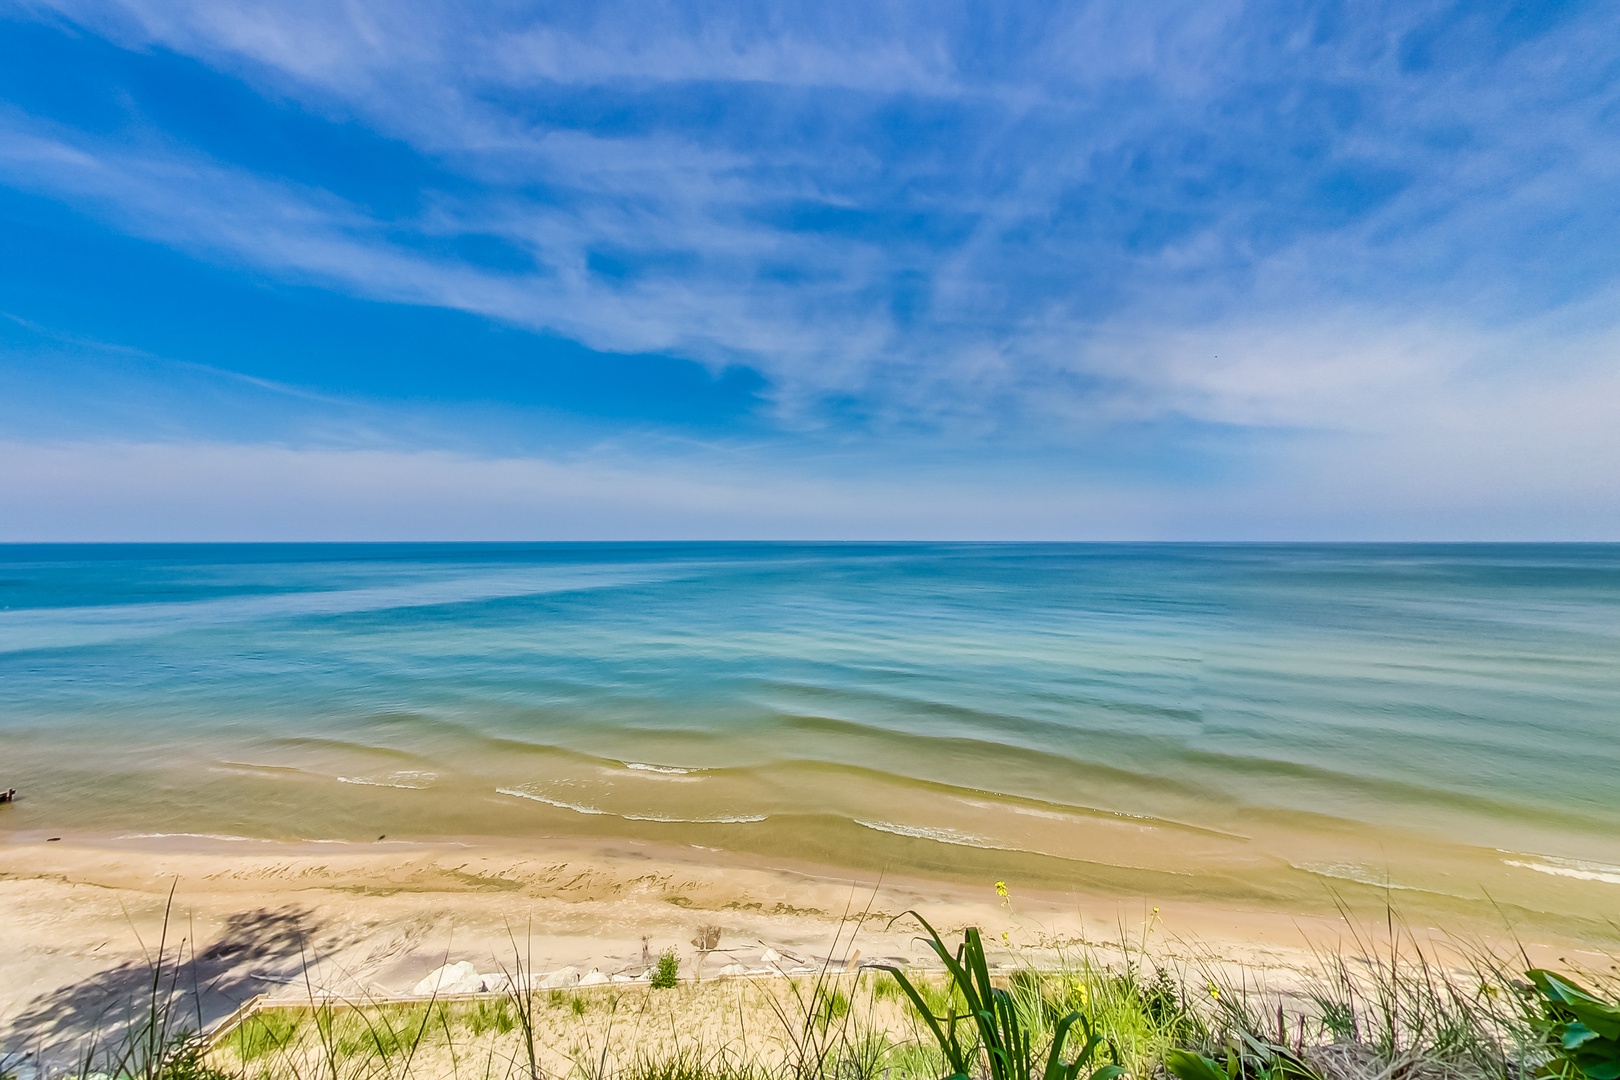 Anyone in the mood for a walk on down to the private-access Lake Michigan beach?